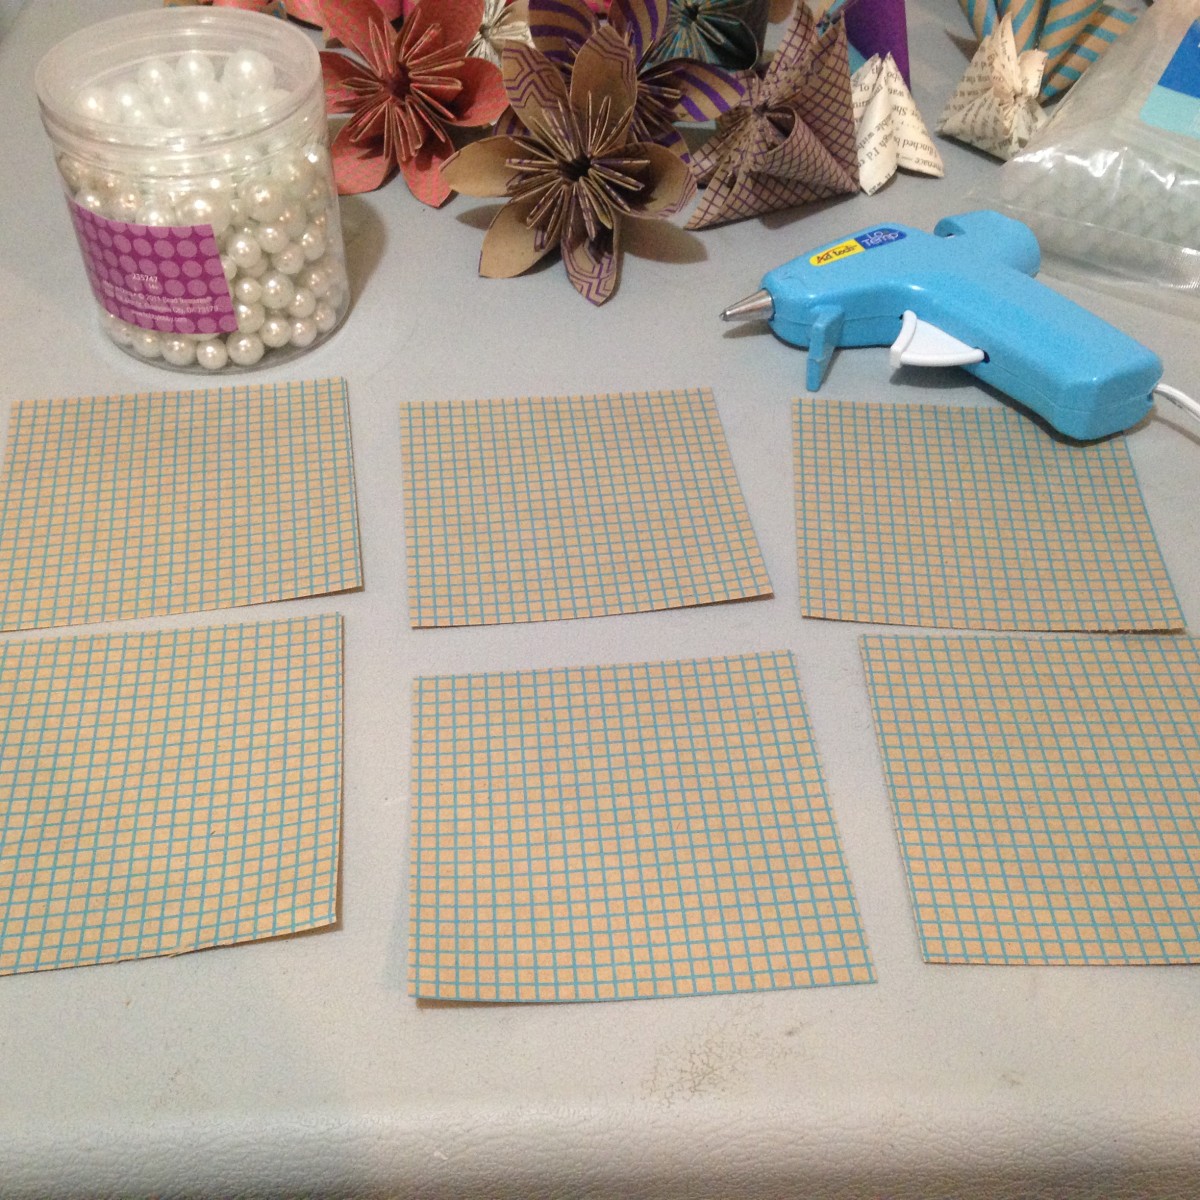 I'm using six squares for each flower. Normally I fold a whole bunch of flowers and after I have a bunch of them folded I glue them all at once. 